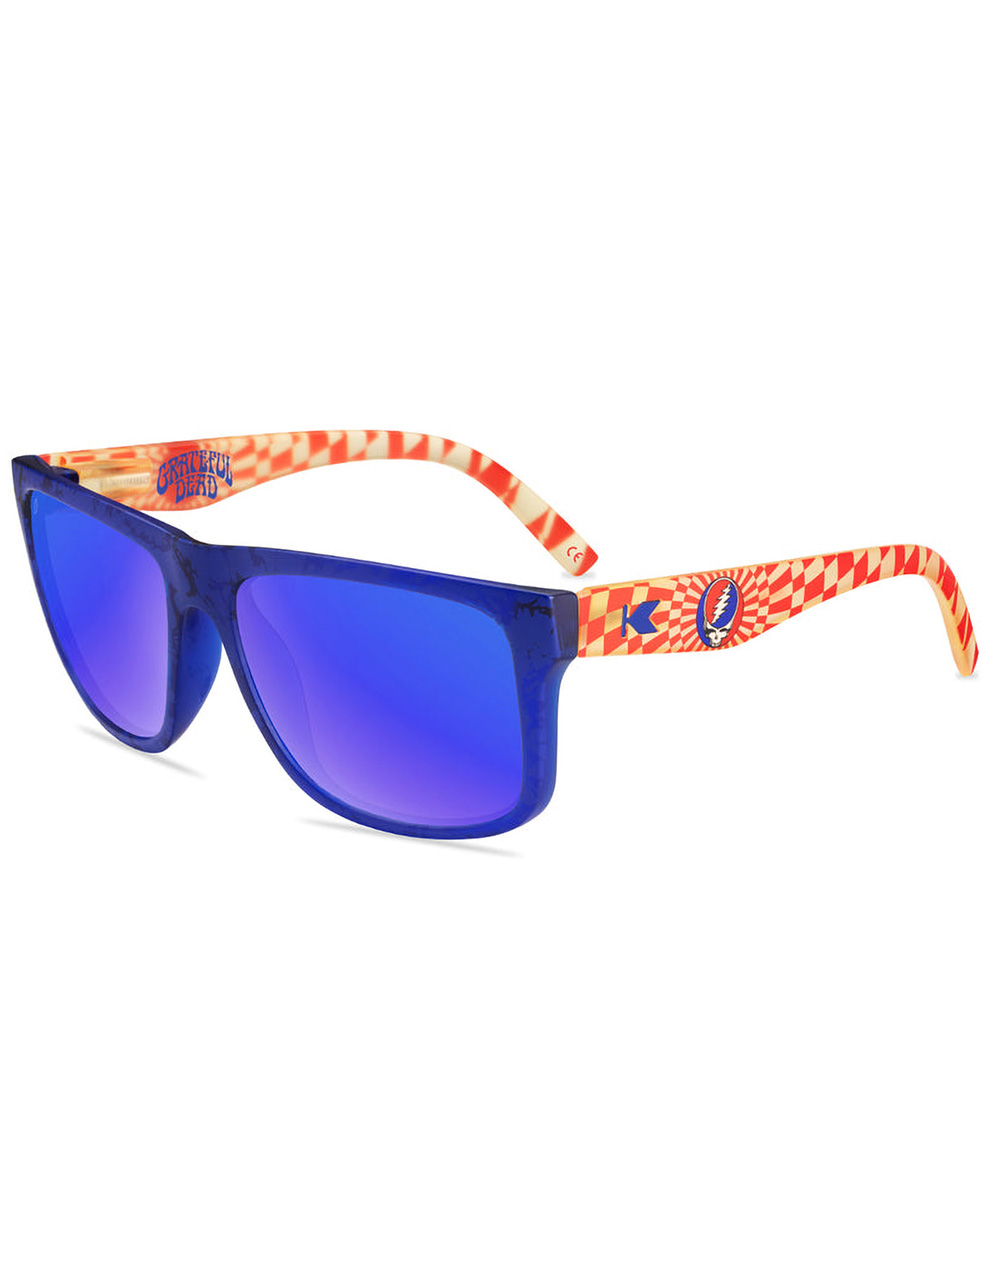 KNOCKAROUND x Grateful Dead Steal Your Face Torrey Pines Polarized Sunglasses